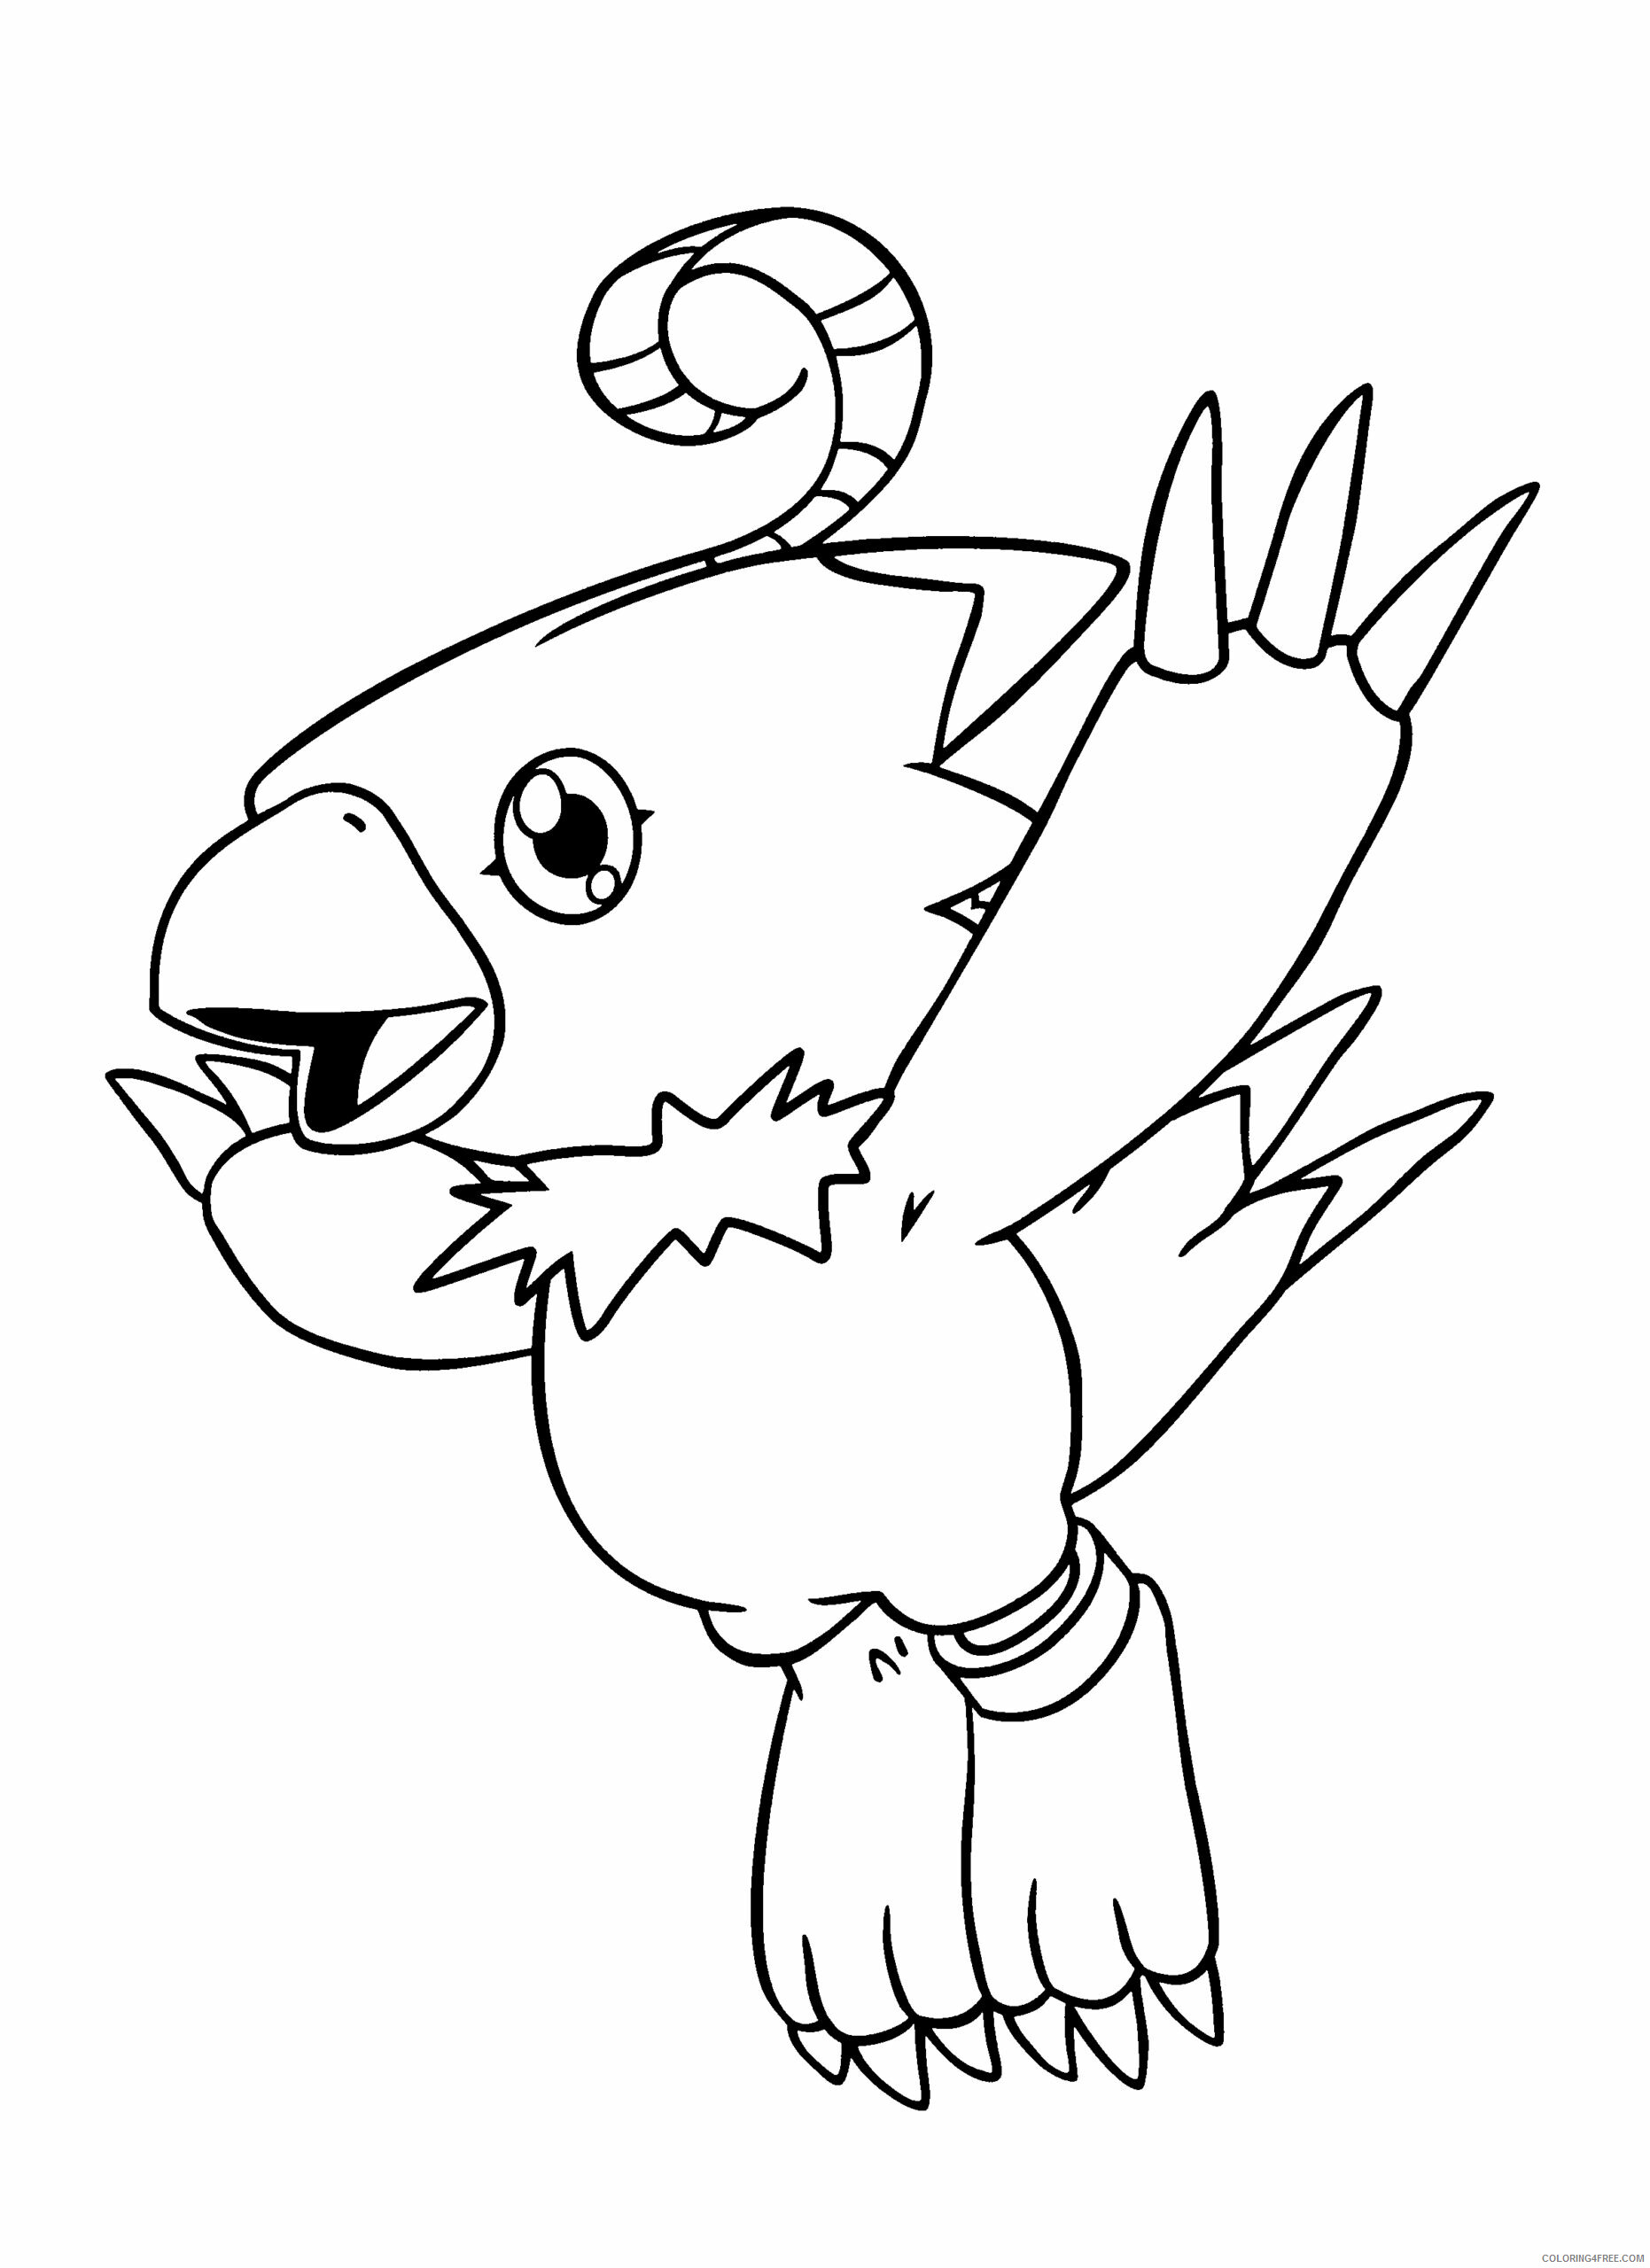 Digimon Printable Coloring Pages Anime digimon xXPCw 2021 0201 Coloring4free